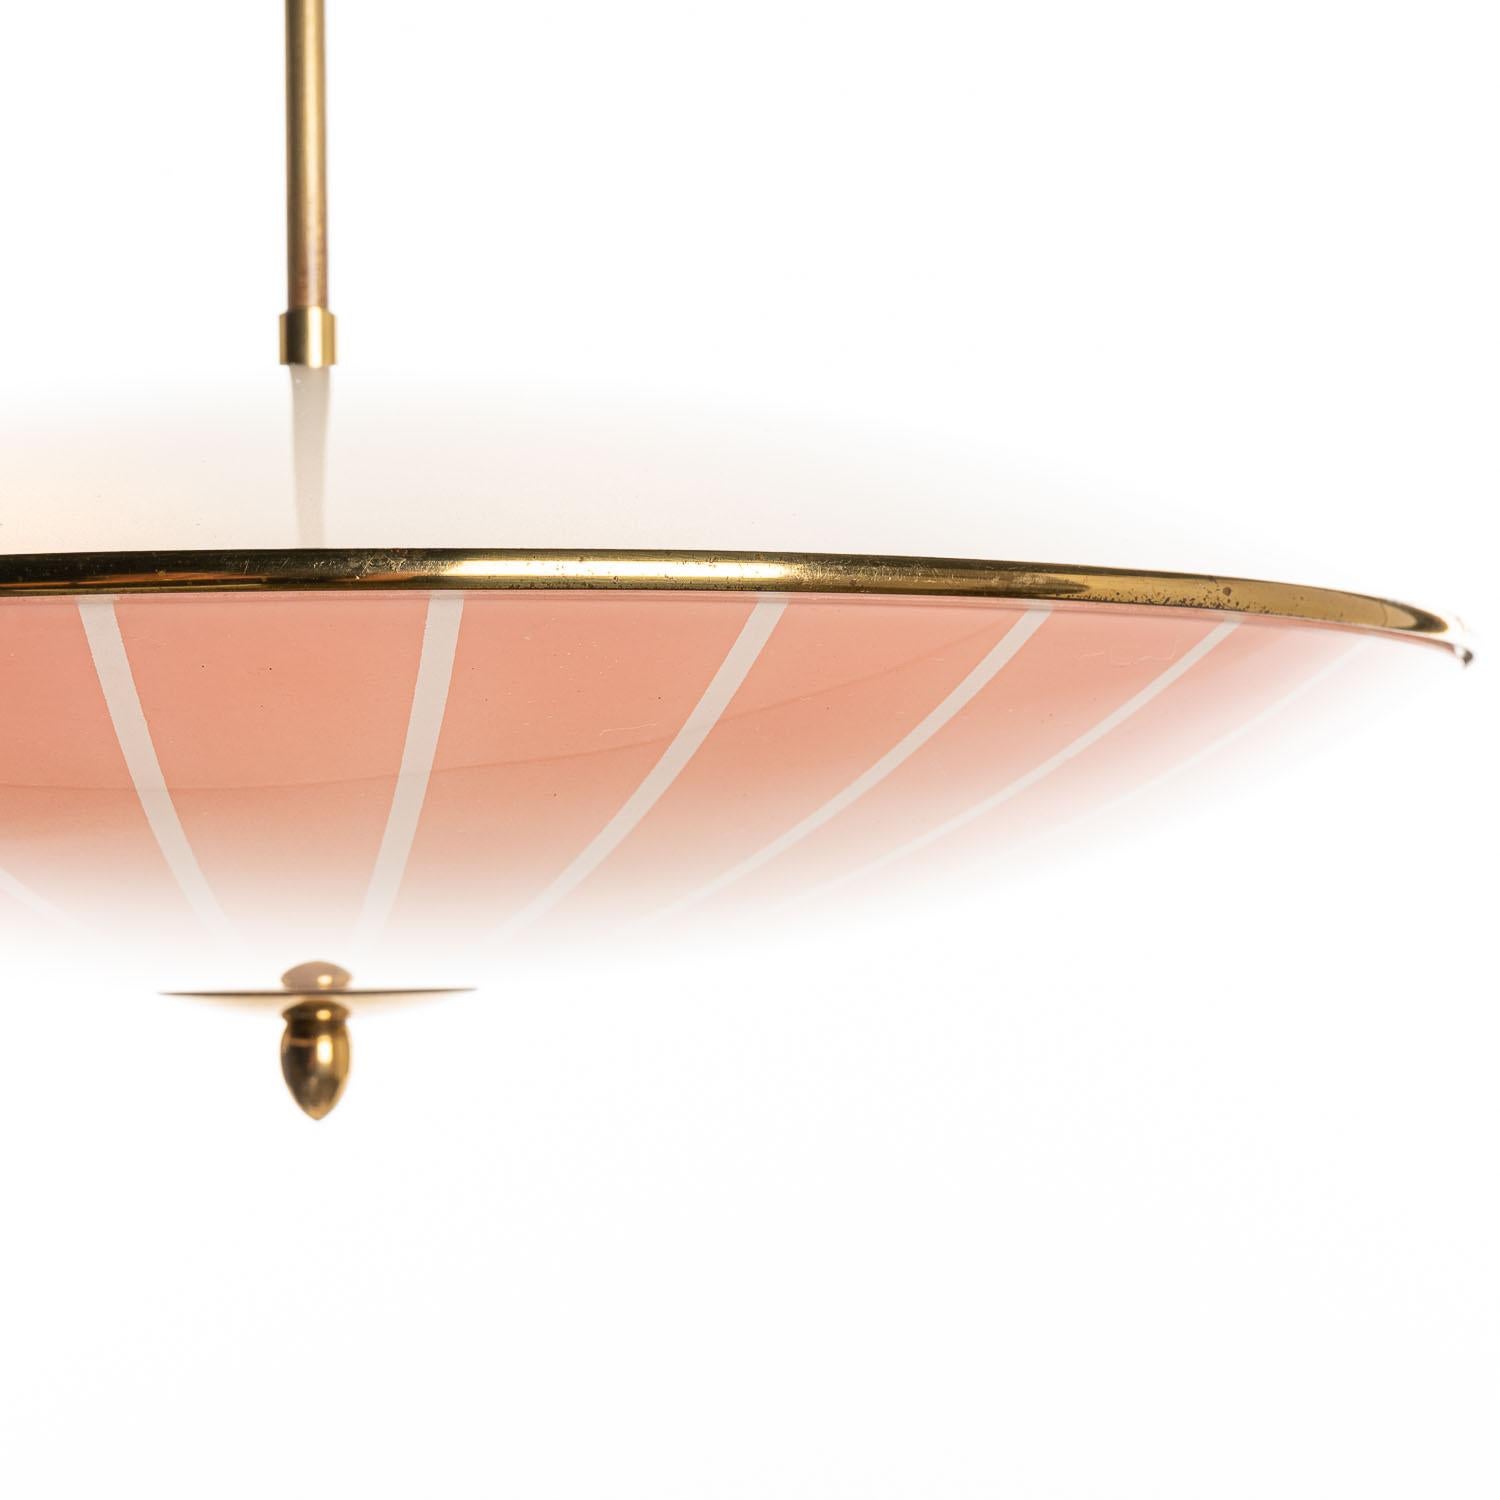 This elegant piece consisting of a brass frame and 2 unique frosted and satin glass reflector/saucers. 
The lower round curved pink-orange-colored glass reflector with white stripe motifs mounts below a round white satin glass reflector. Finished